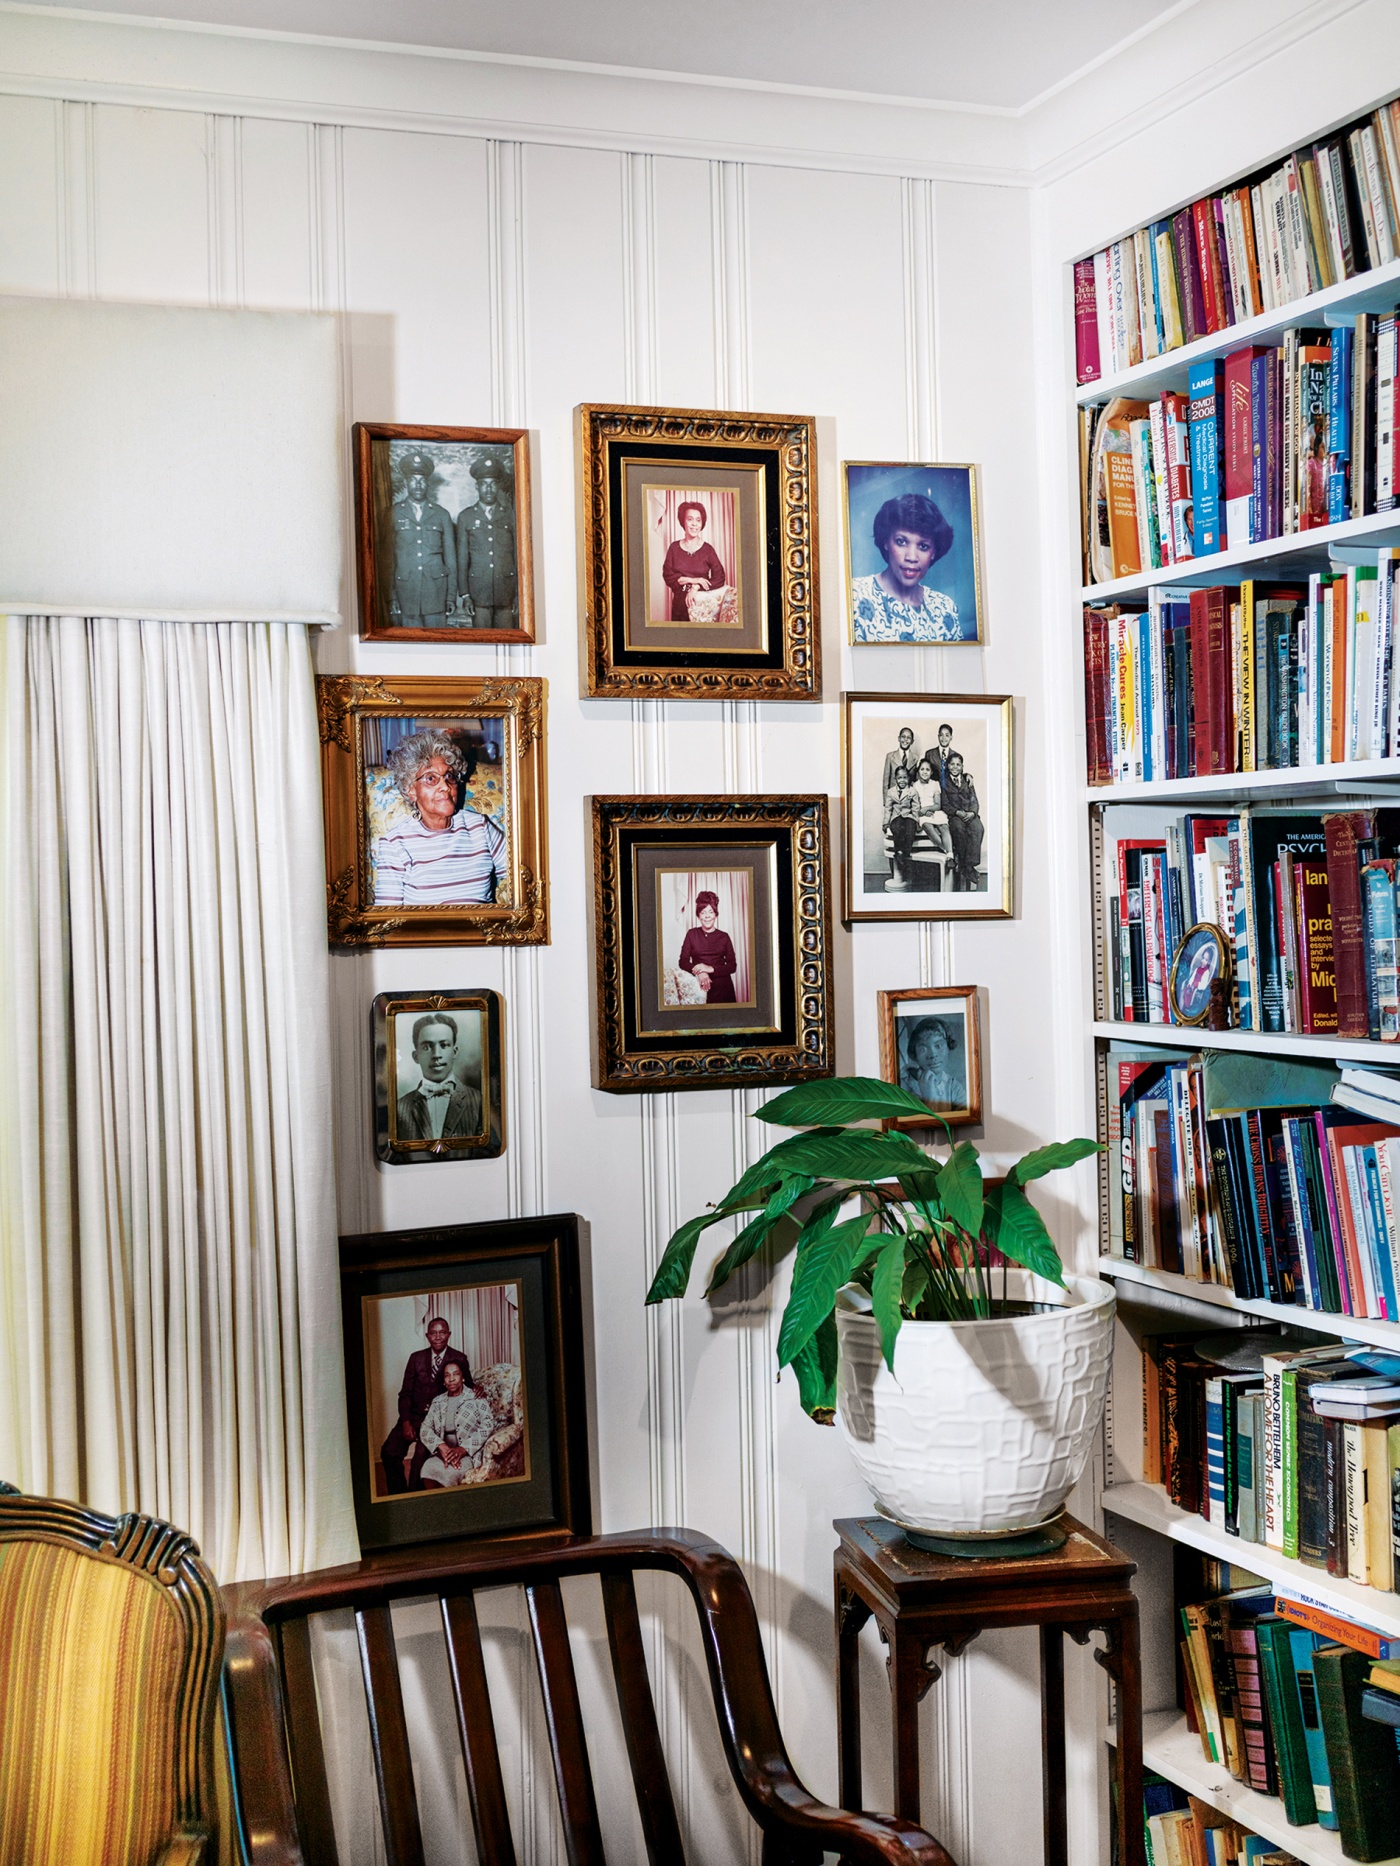 photo of the bookshelves in Dr Smith's home